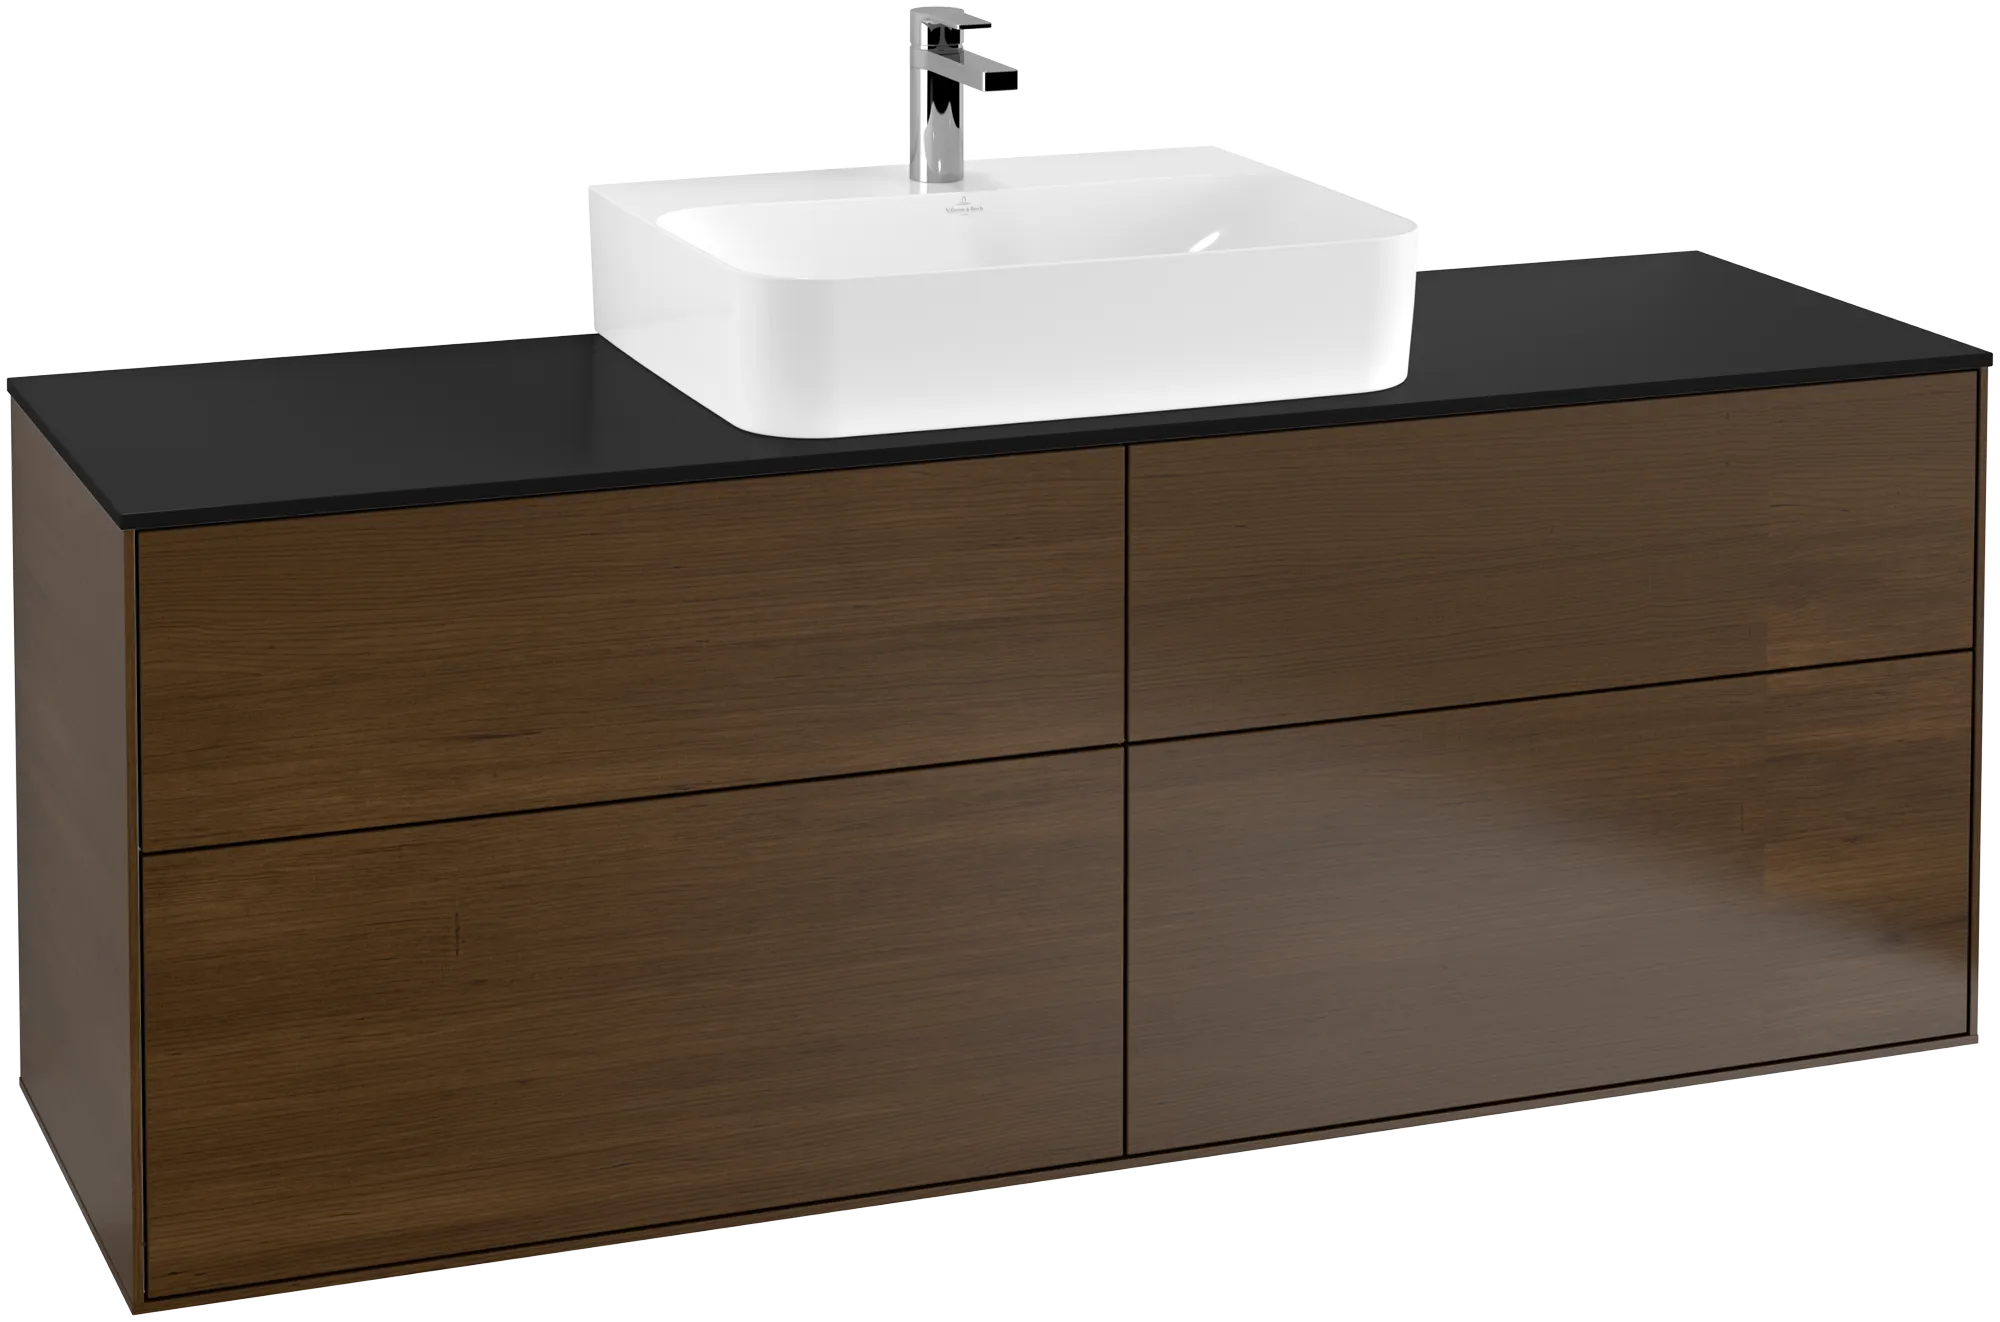 Picture of VILLEROY BOCH Finion Vanity unit, with lighting, 4 pull-out compartments, 1600 x 603 x 501 mm, Walnut Veneer / Glass Black Matt #G19200GN